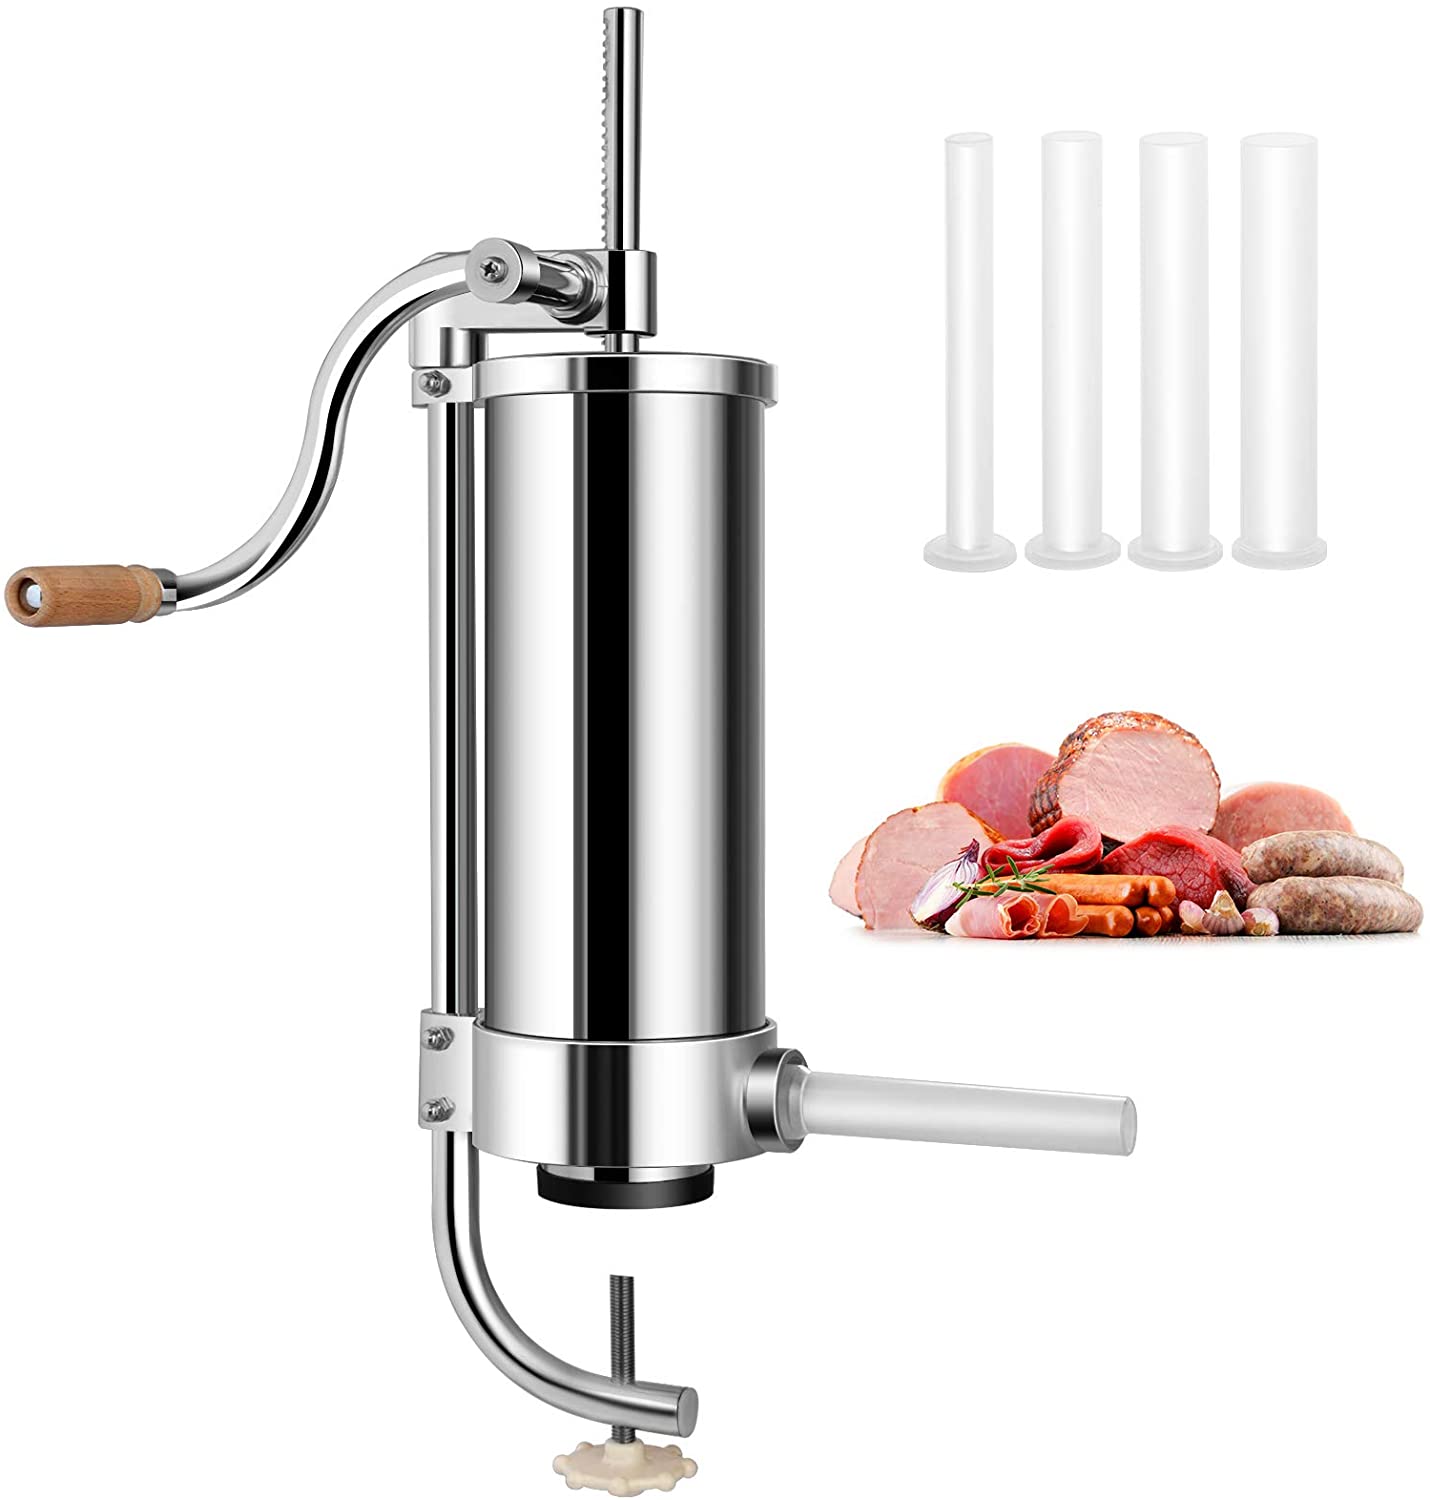 GOPLUS Sausage Filler Made of Stainless Steel, Sausage Filling Machine, Manual, Sausage Press with 4 Different Filling Tubes, Sausage Syringe with Attachment Clip, Easy to Use and Easy to Clean (3.6 L)